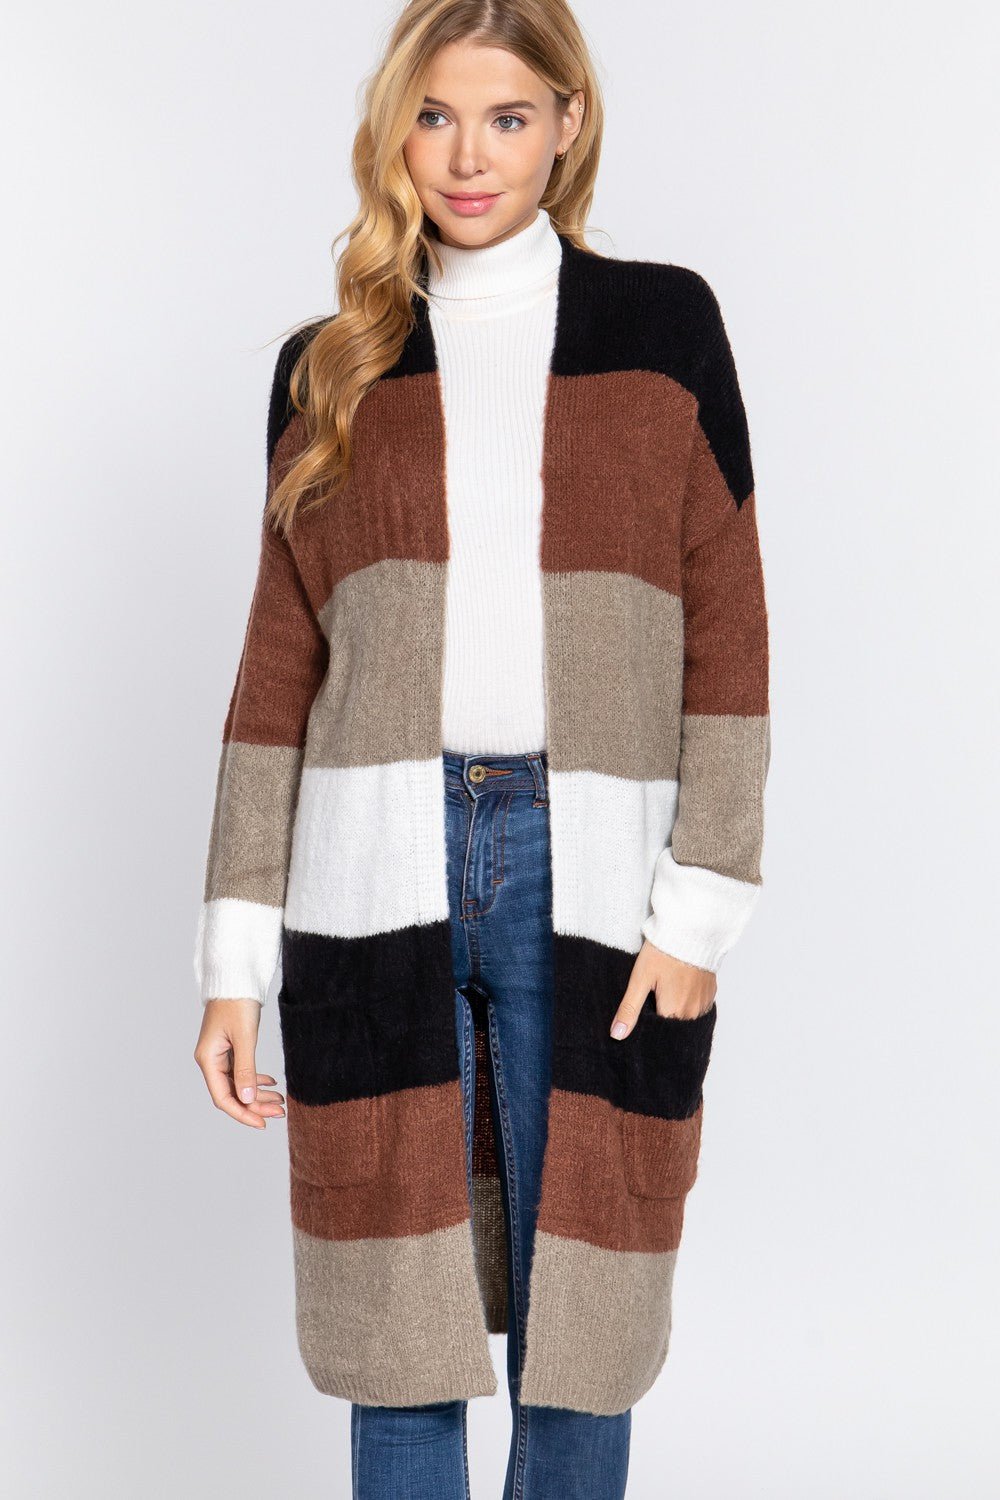 CARDIGAN - COLORBLOCK BLACK AND BROWN STRIPED-hotRAGS.com